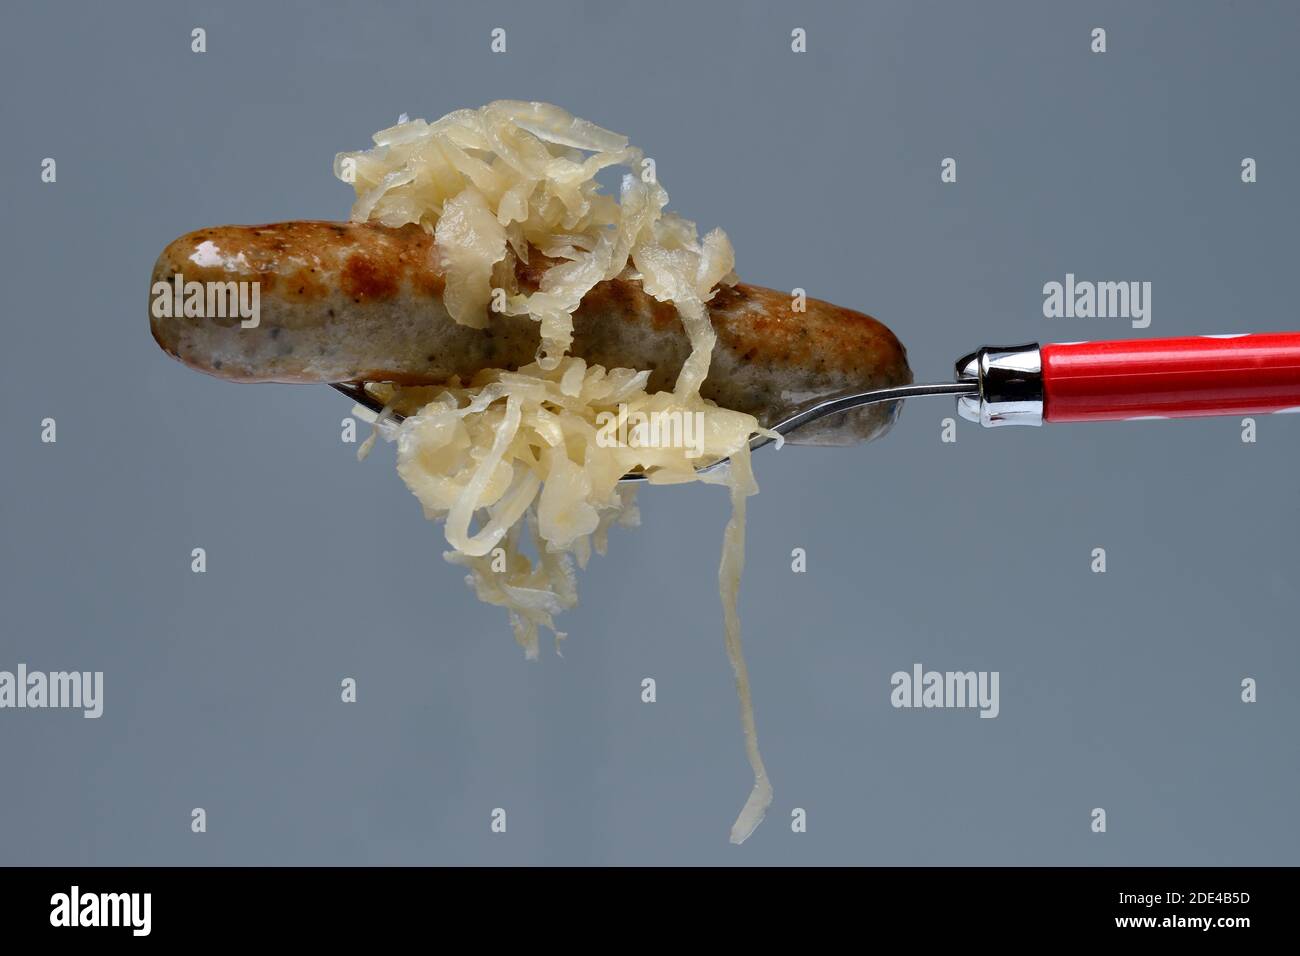 Nuremberg grilled sausages with sauerkraut on fork, Germany Stock Photo